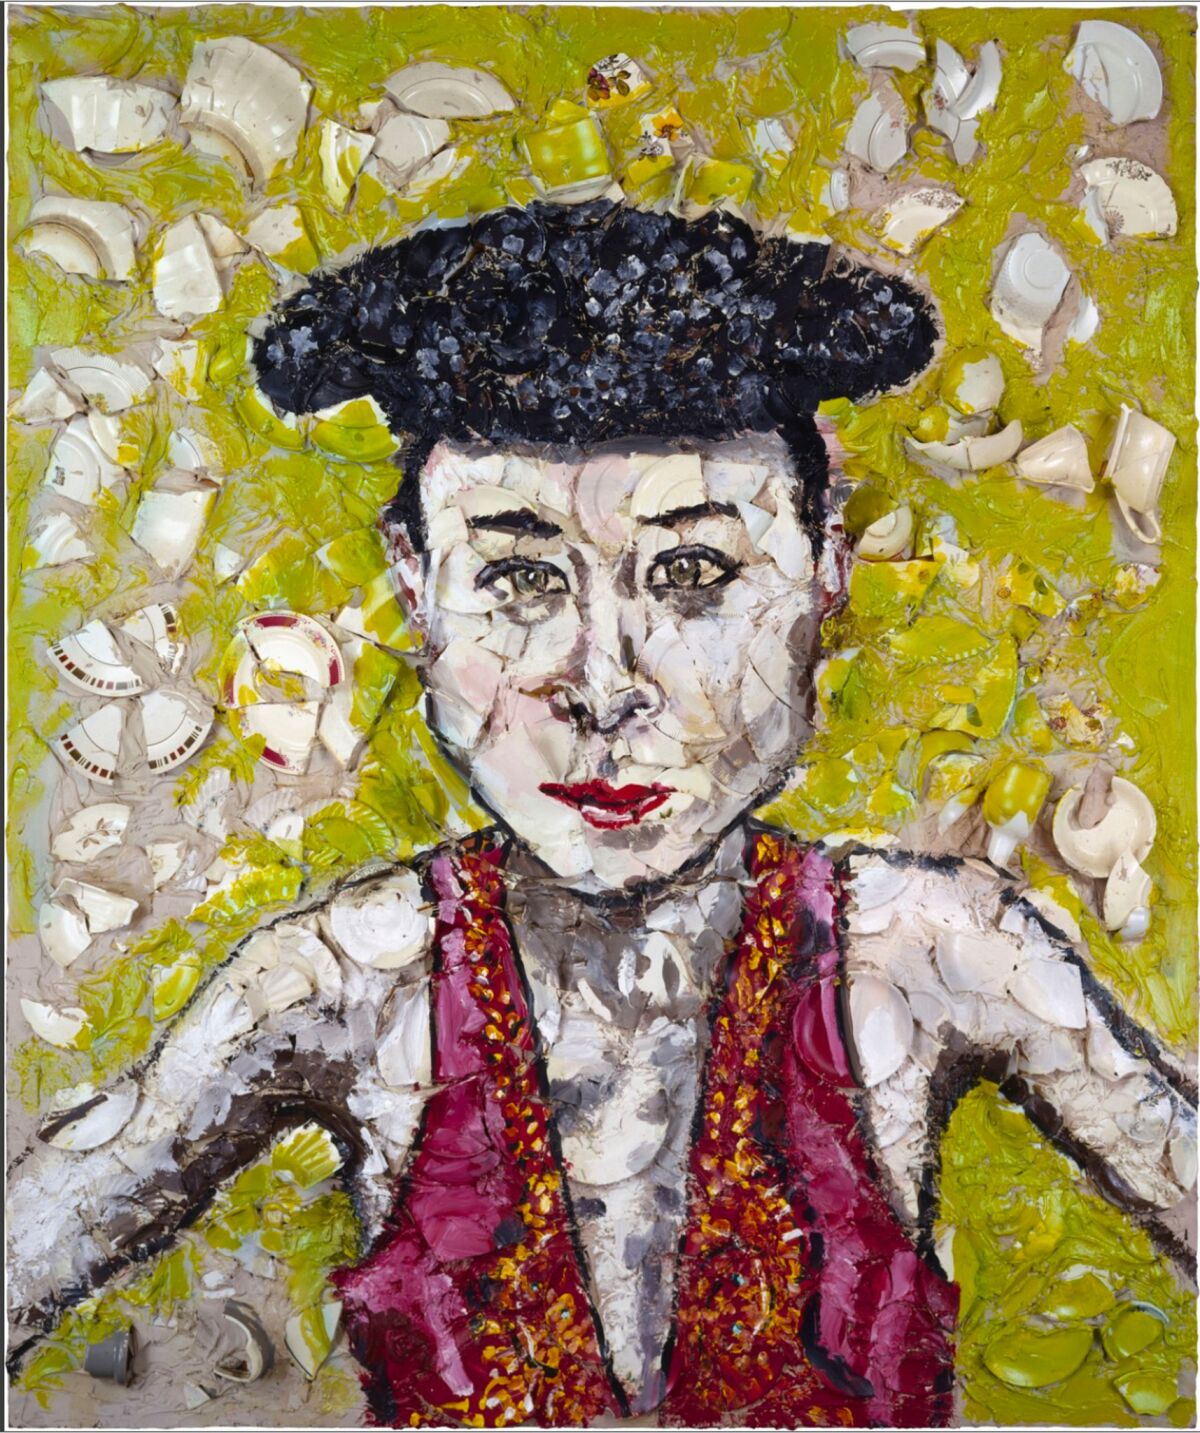 Julian Schnabel's painting, "Tina in a matador hat," at the Orsay museum in Paris for his exhibition “Orsay Through the Eyes of Julian Schnabel.”